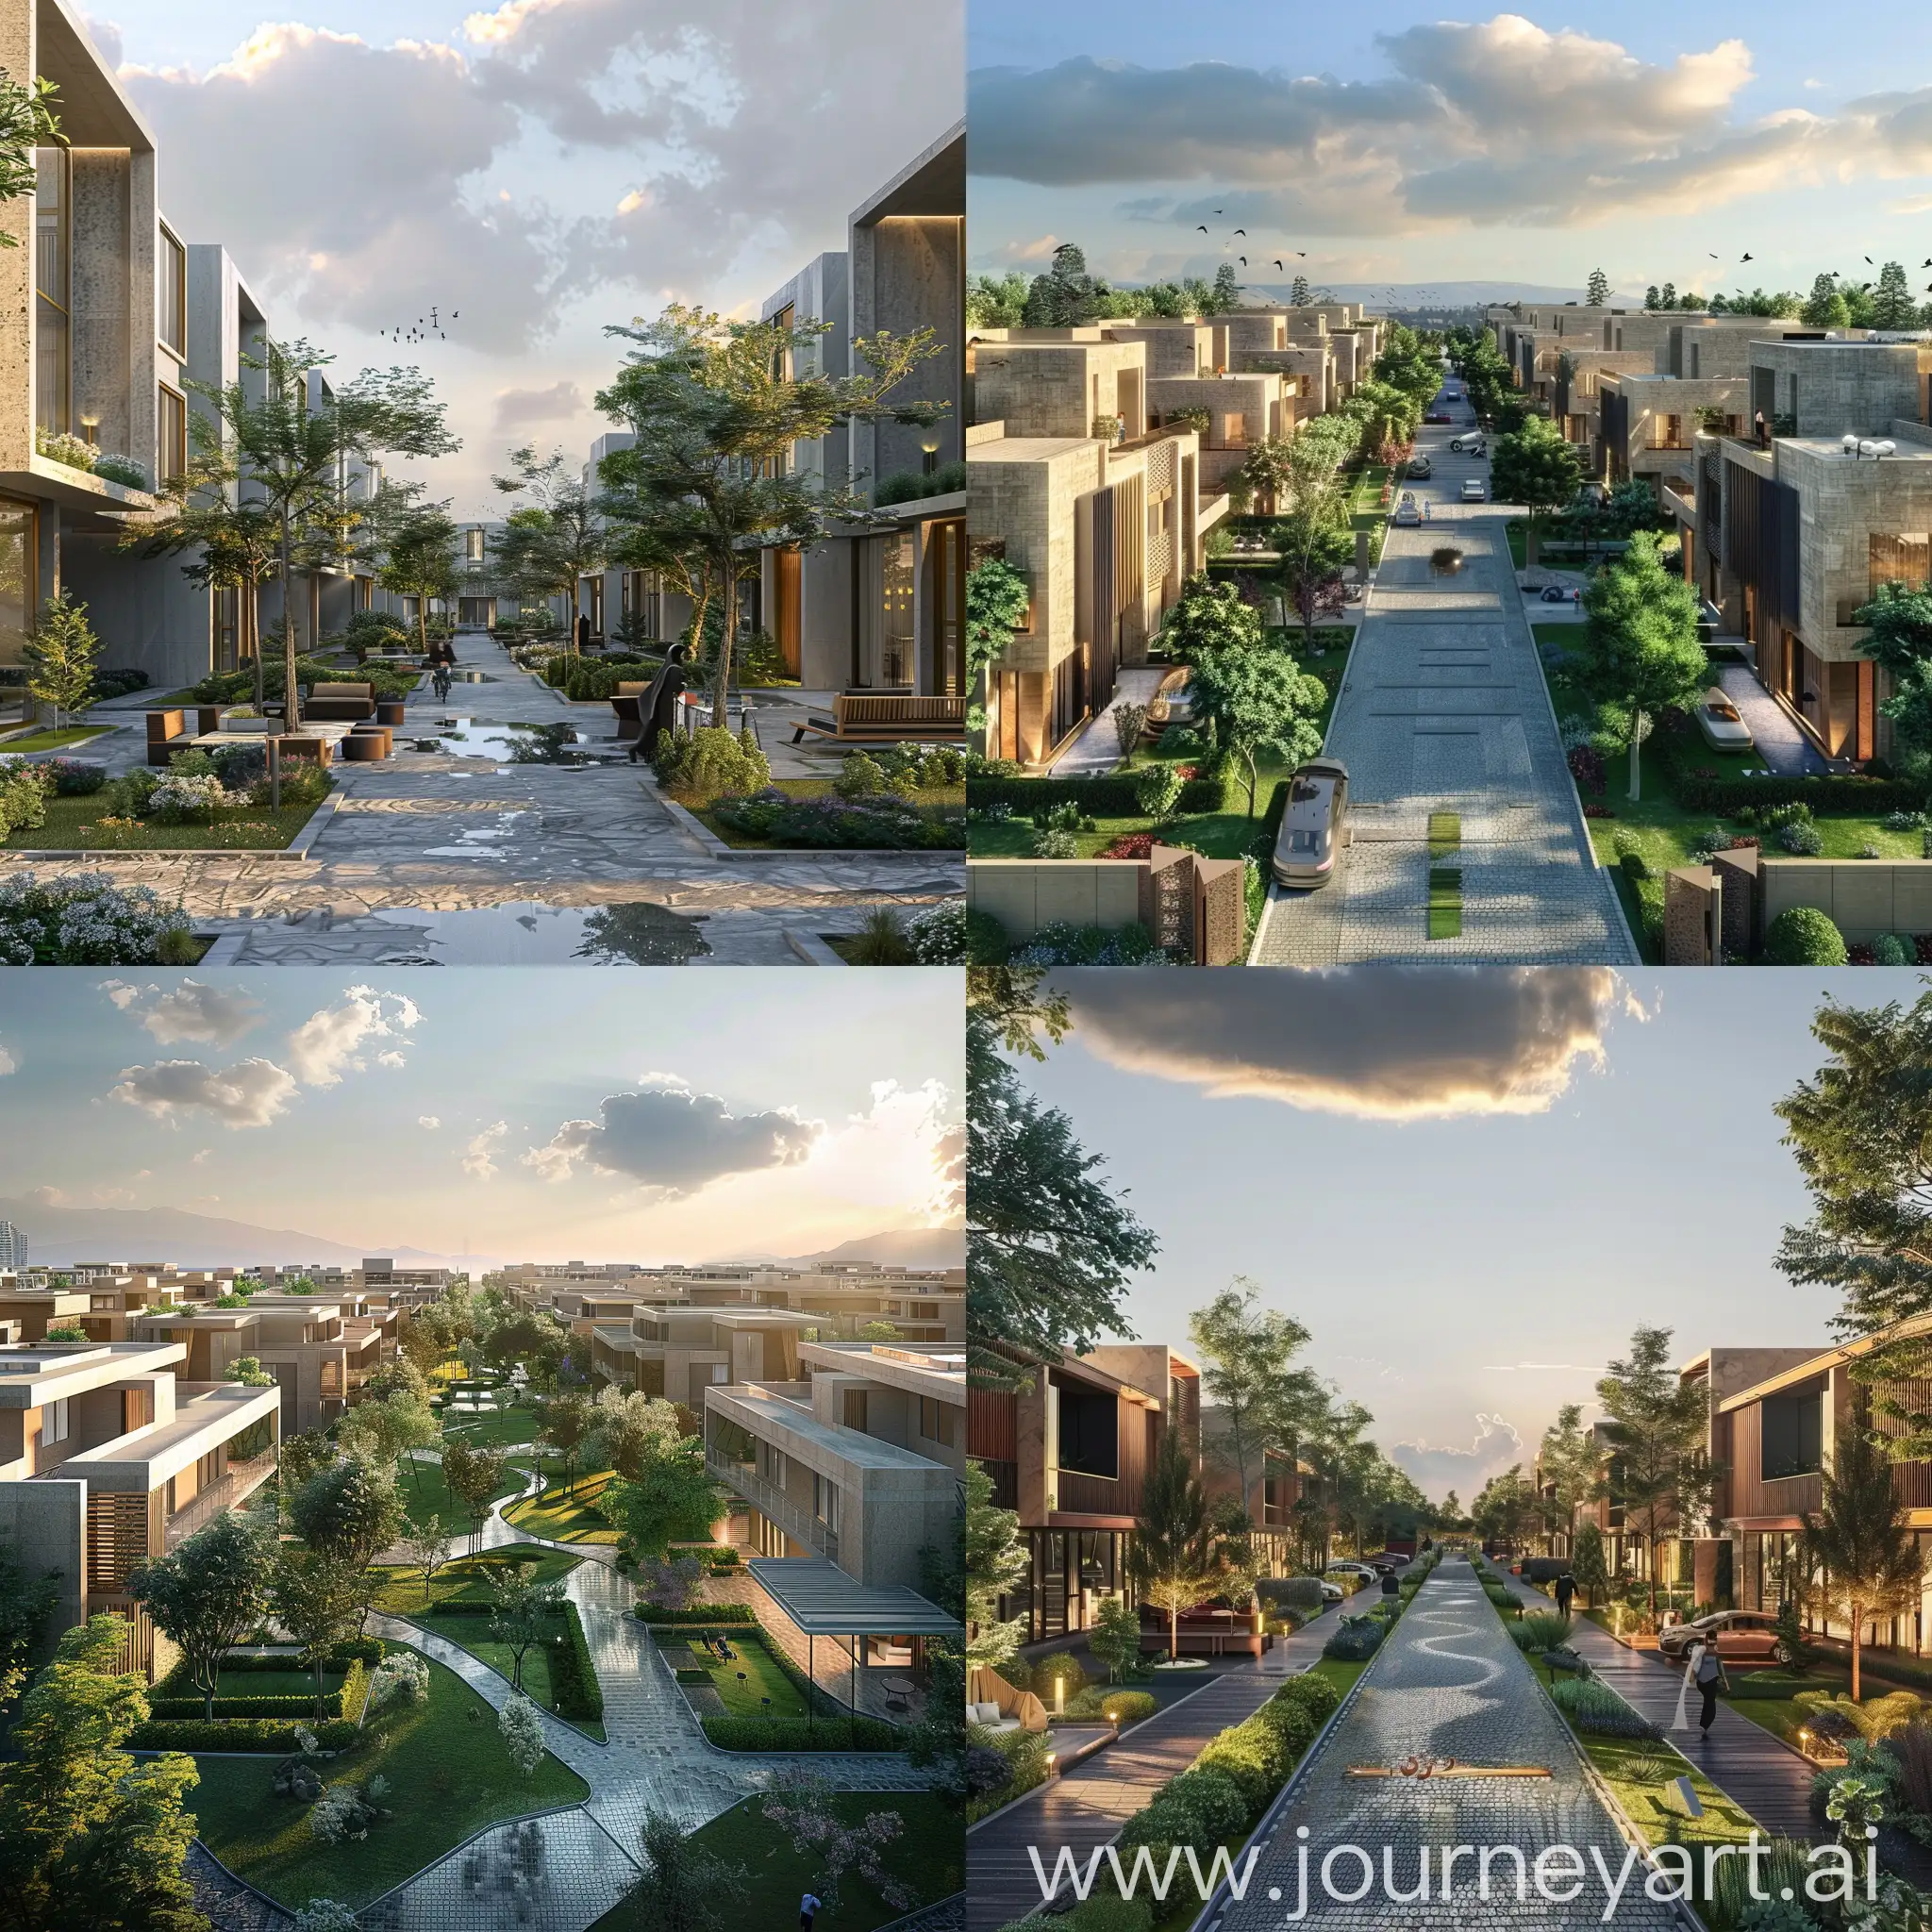 IranianInspired-Residential-Townscape-with-Green-Spaces